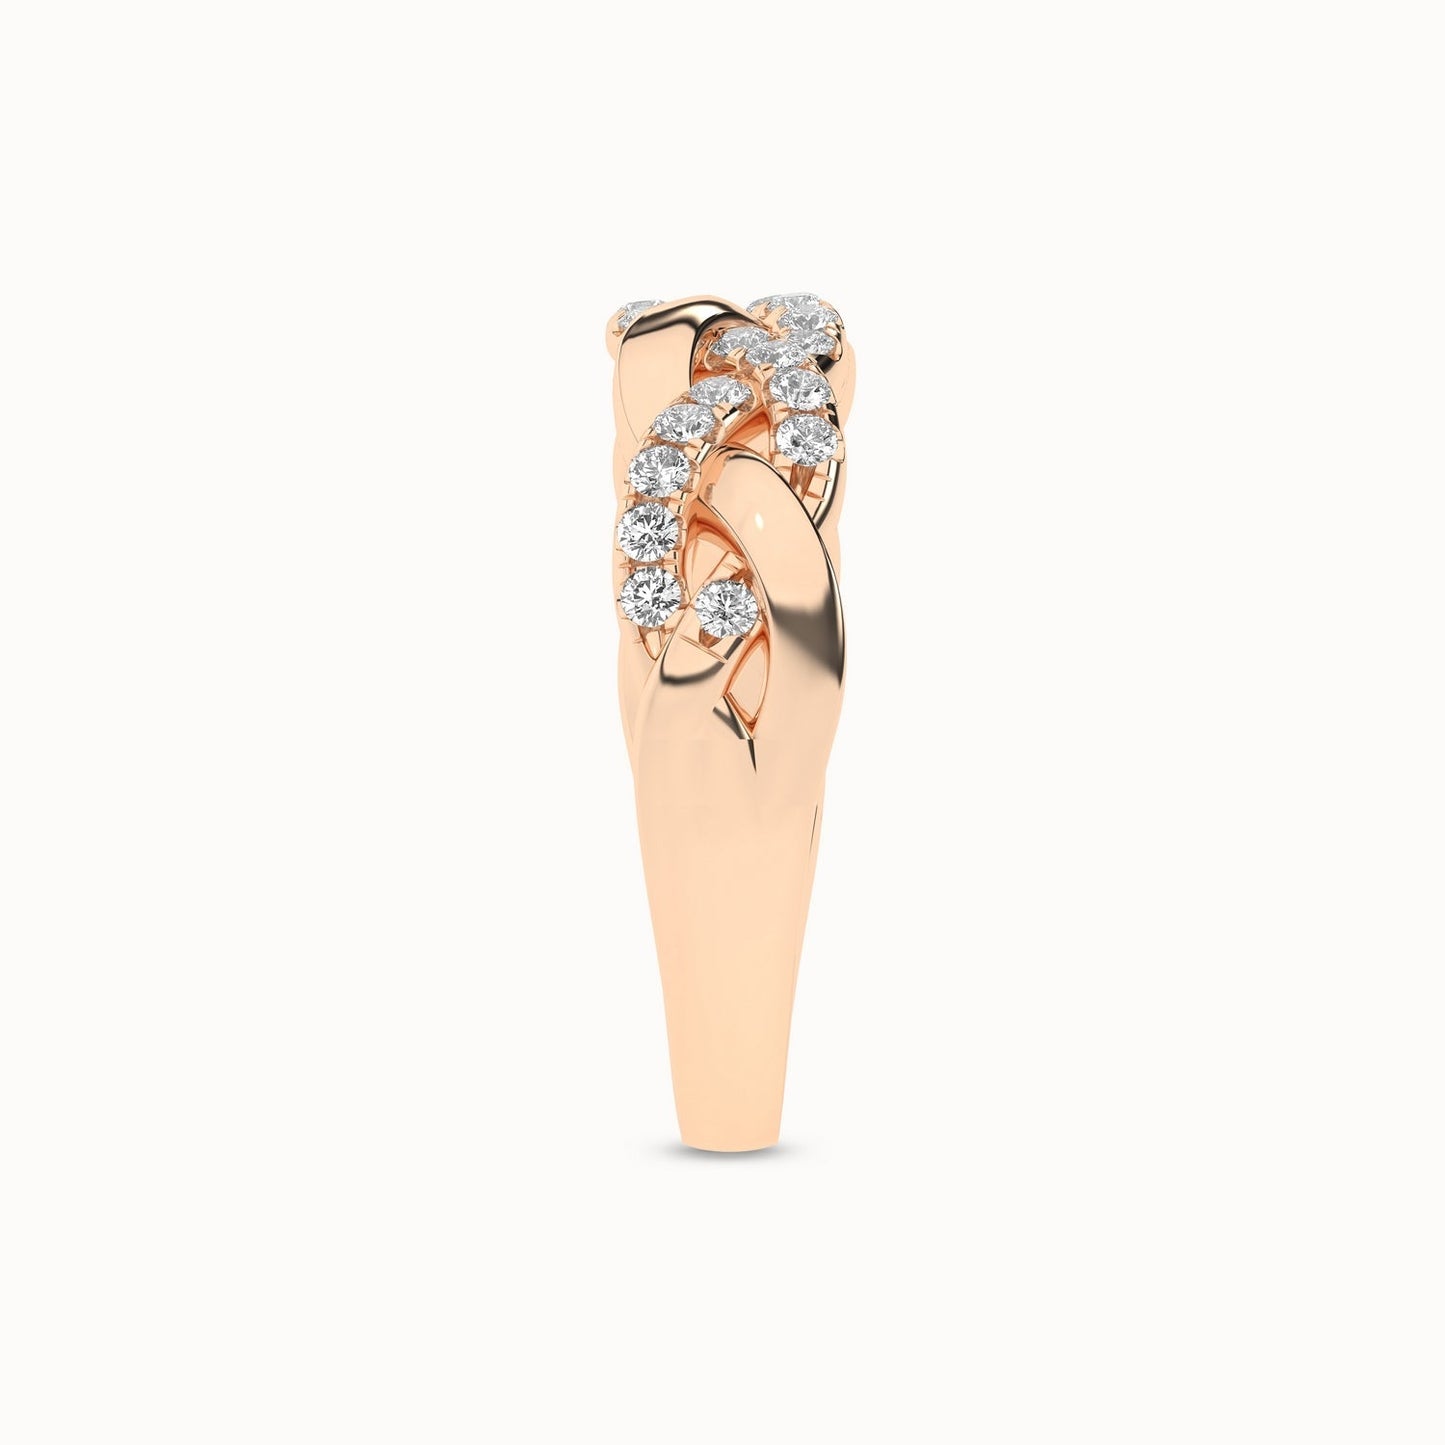 Triple Entwined Braid Ring_Product Angle_1/3Ct - 4